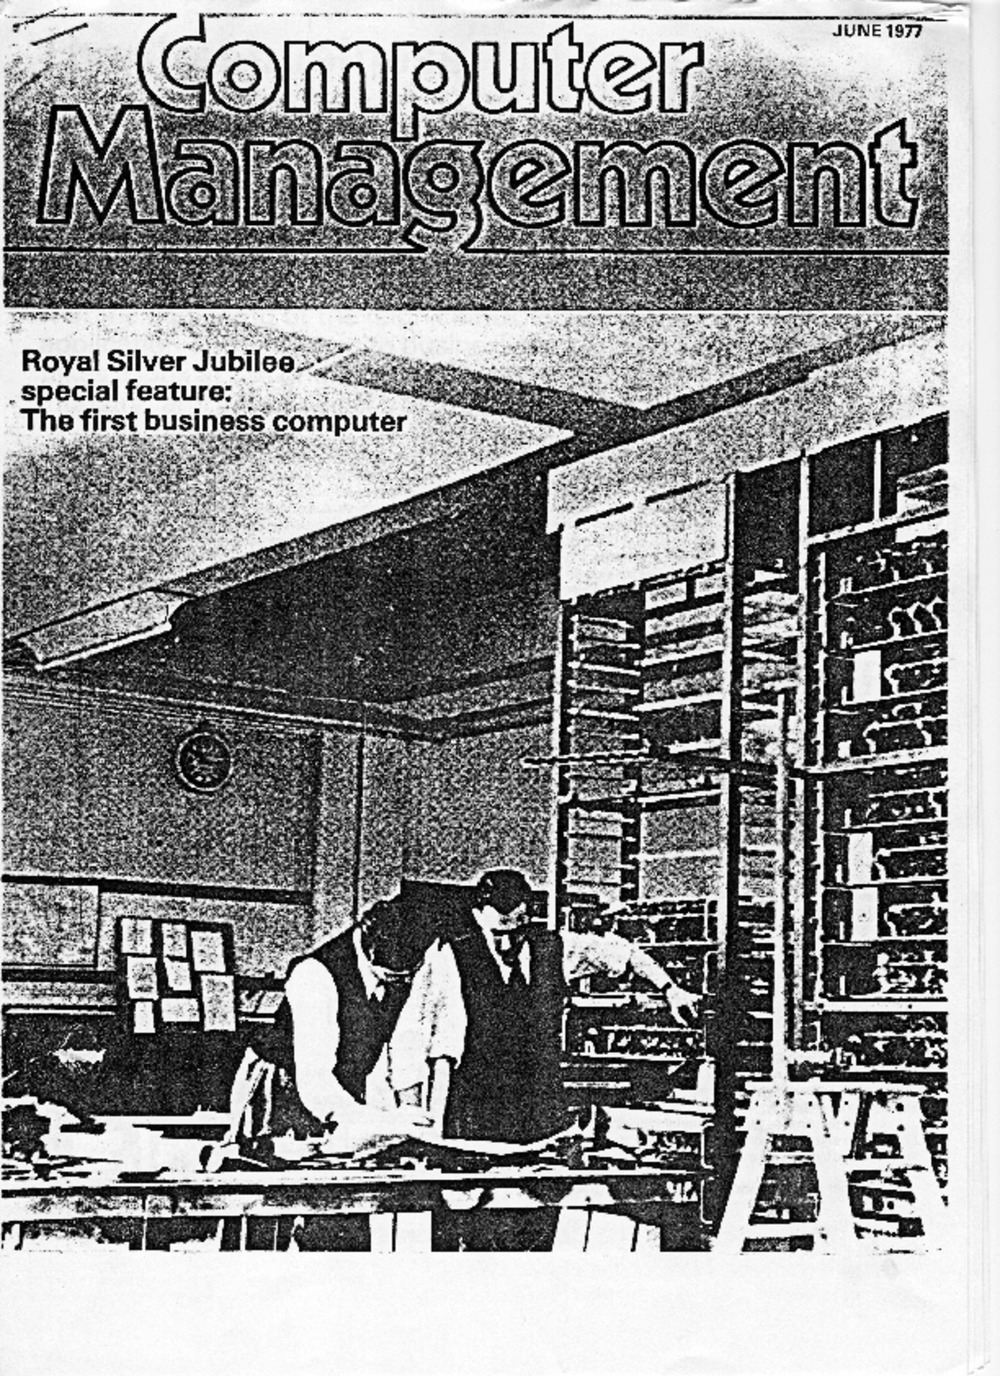 Article: The First Business Computer